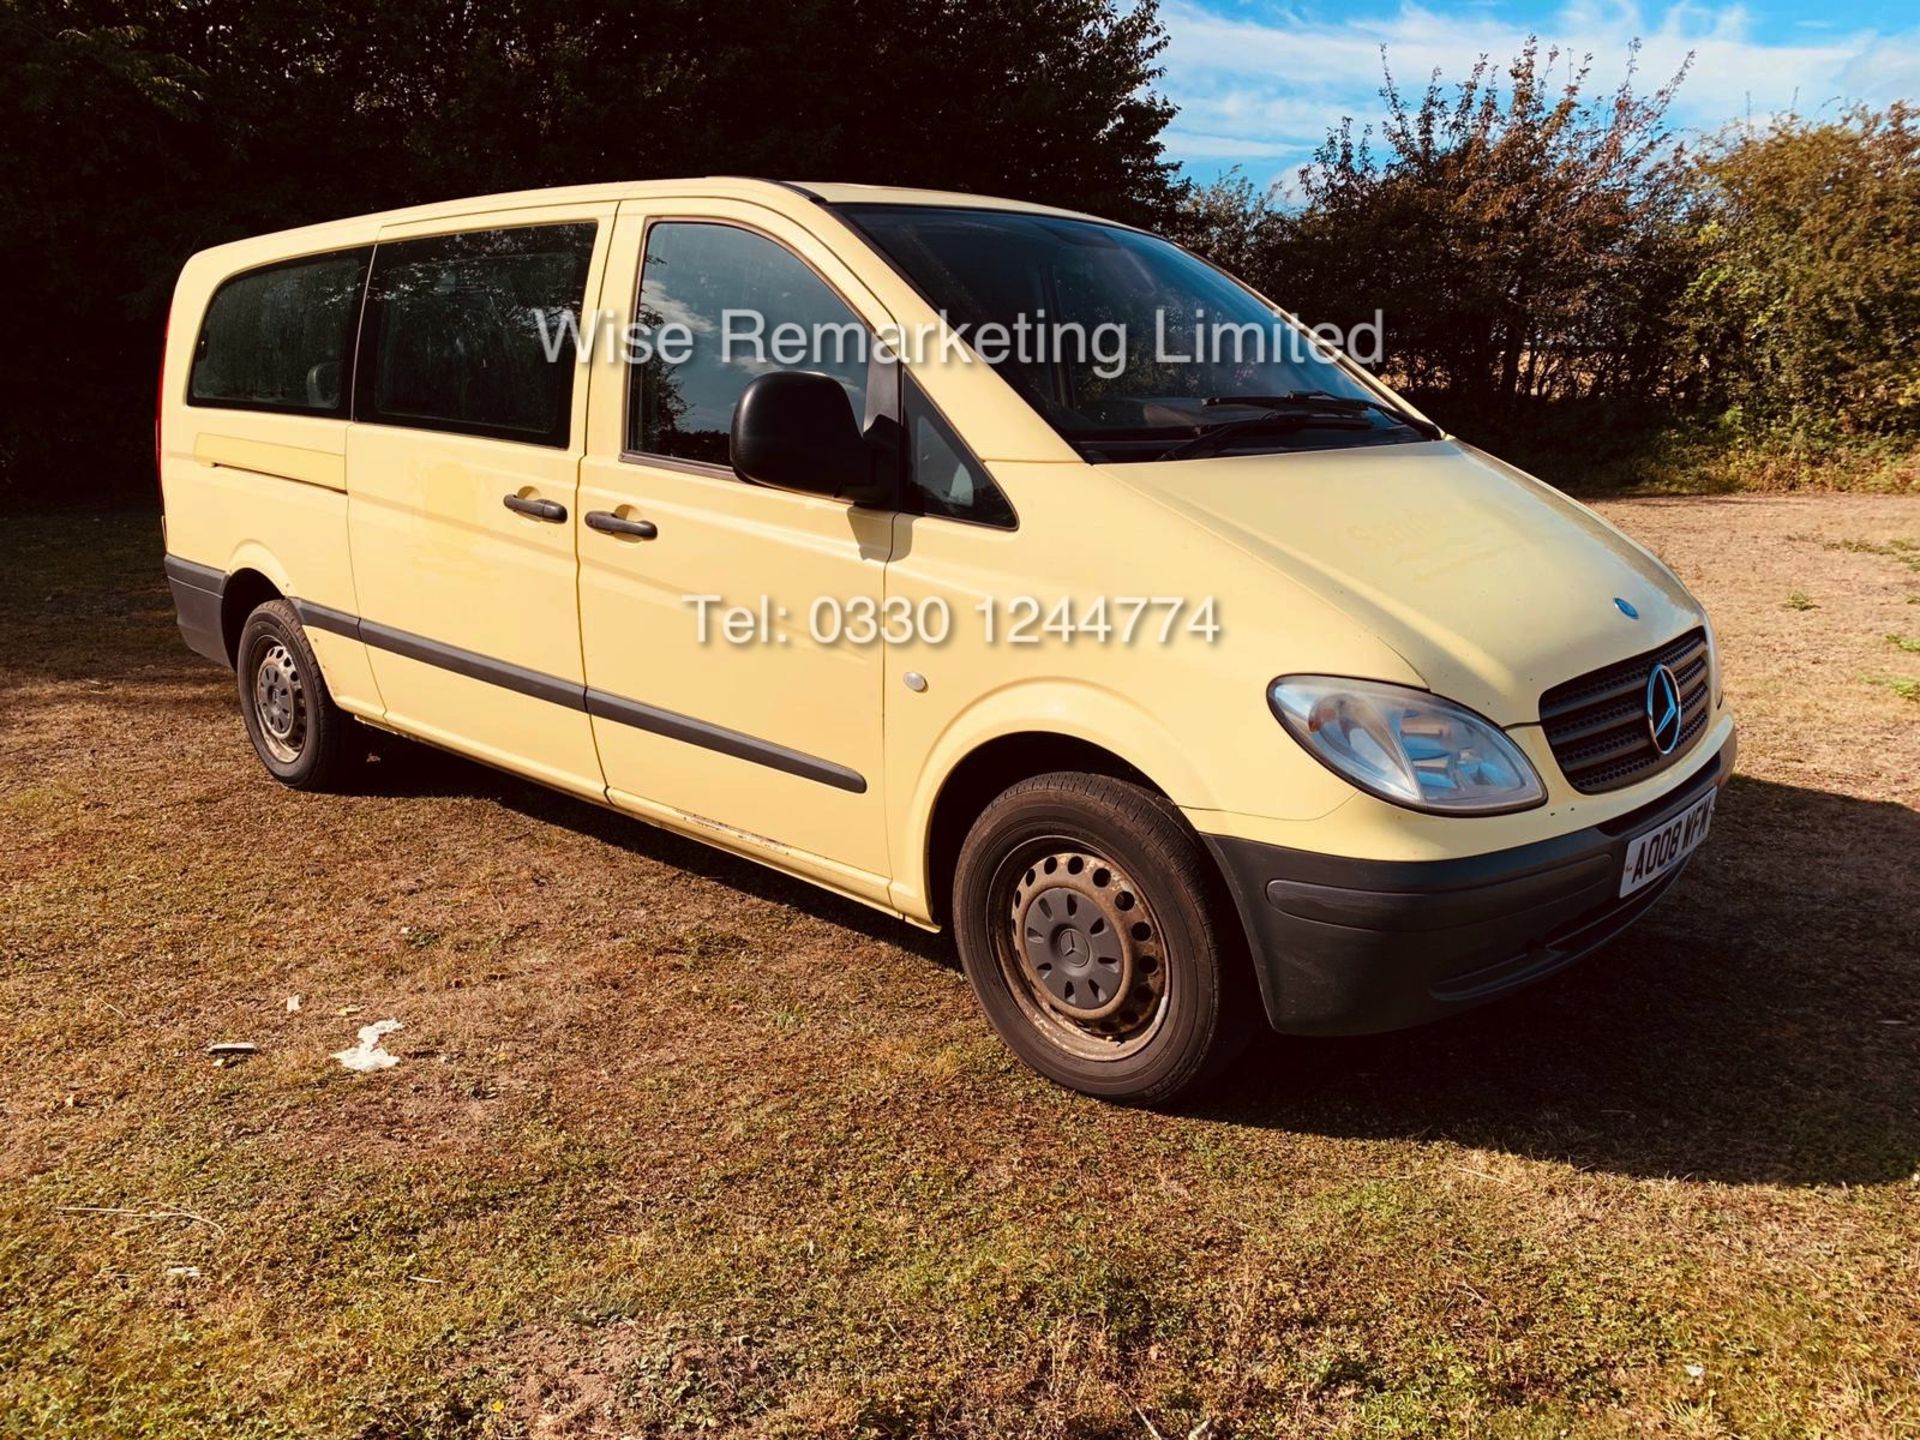 MERCEDES VITO 111 2.1 CDI TRAVELINER **9 SEATER** (2008 08 REG) 1 KEEPER FROM NEW - Image 2 of 19